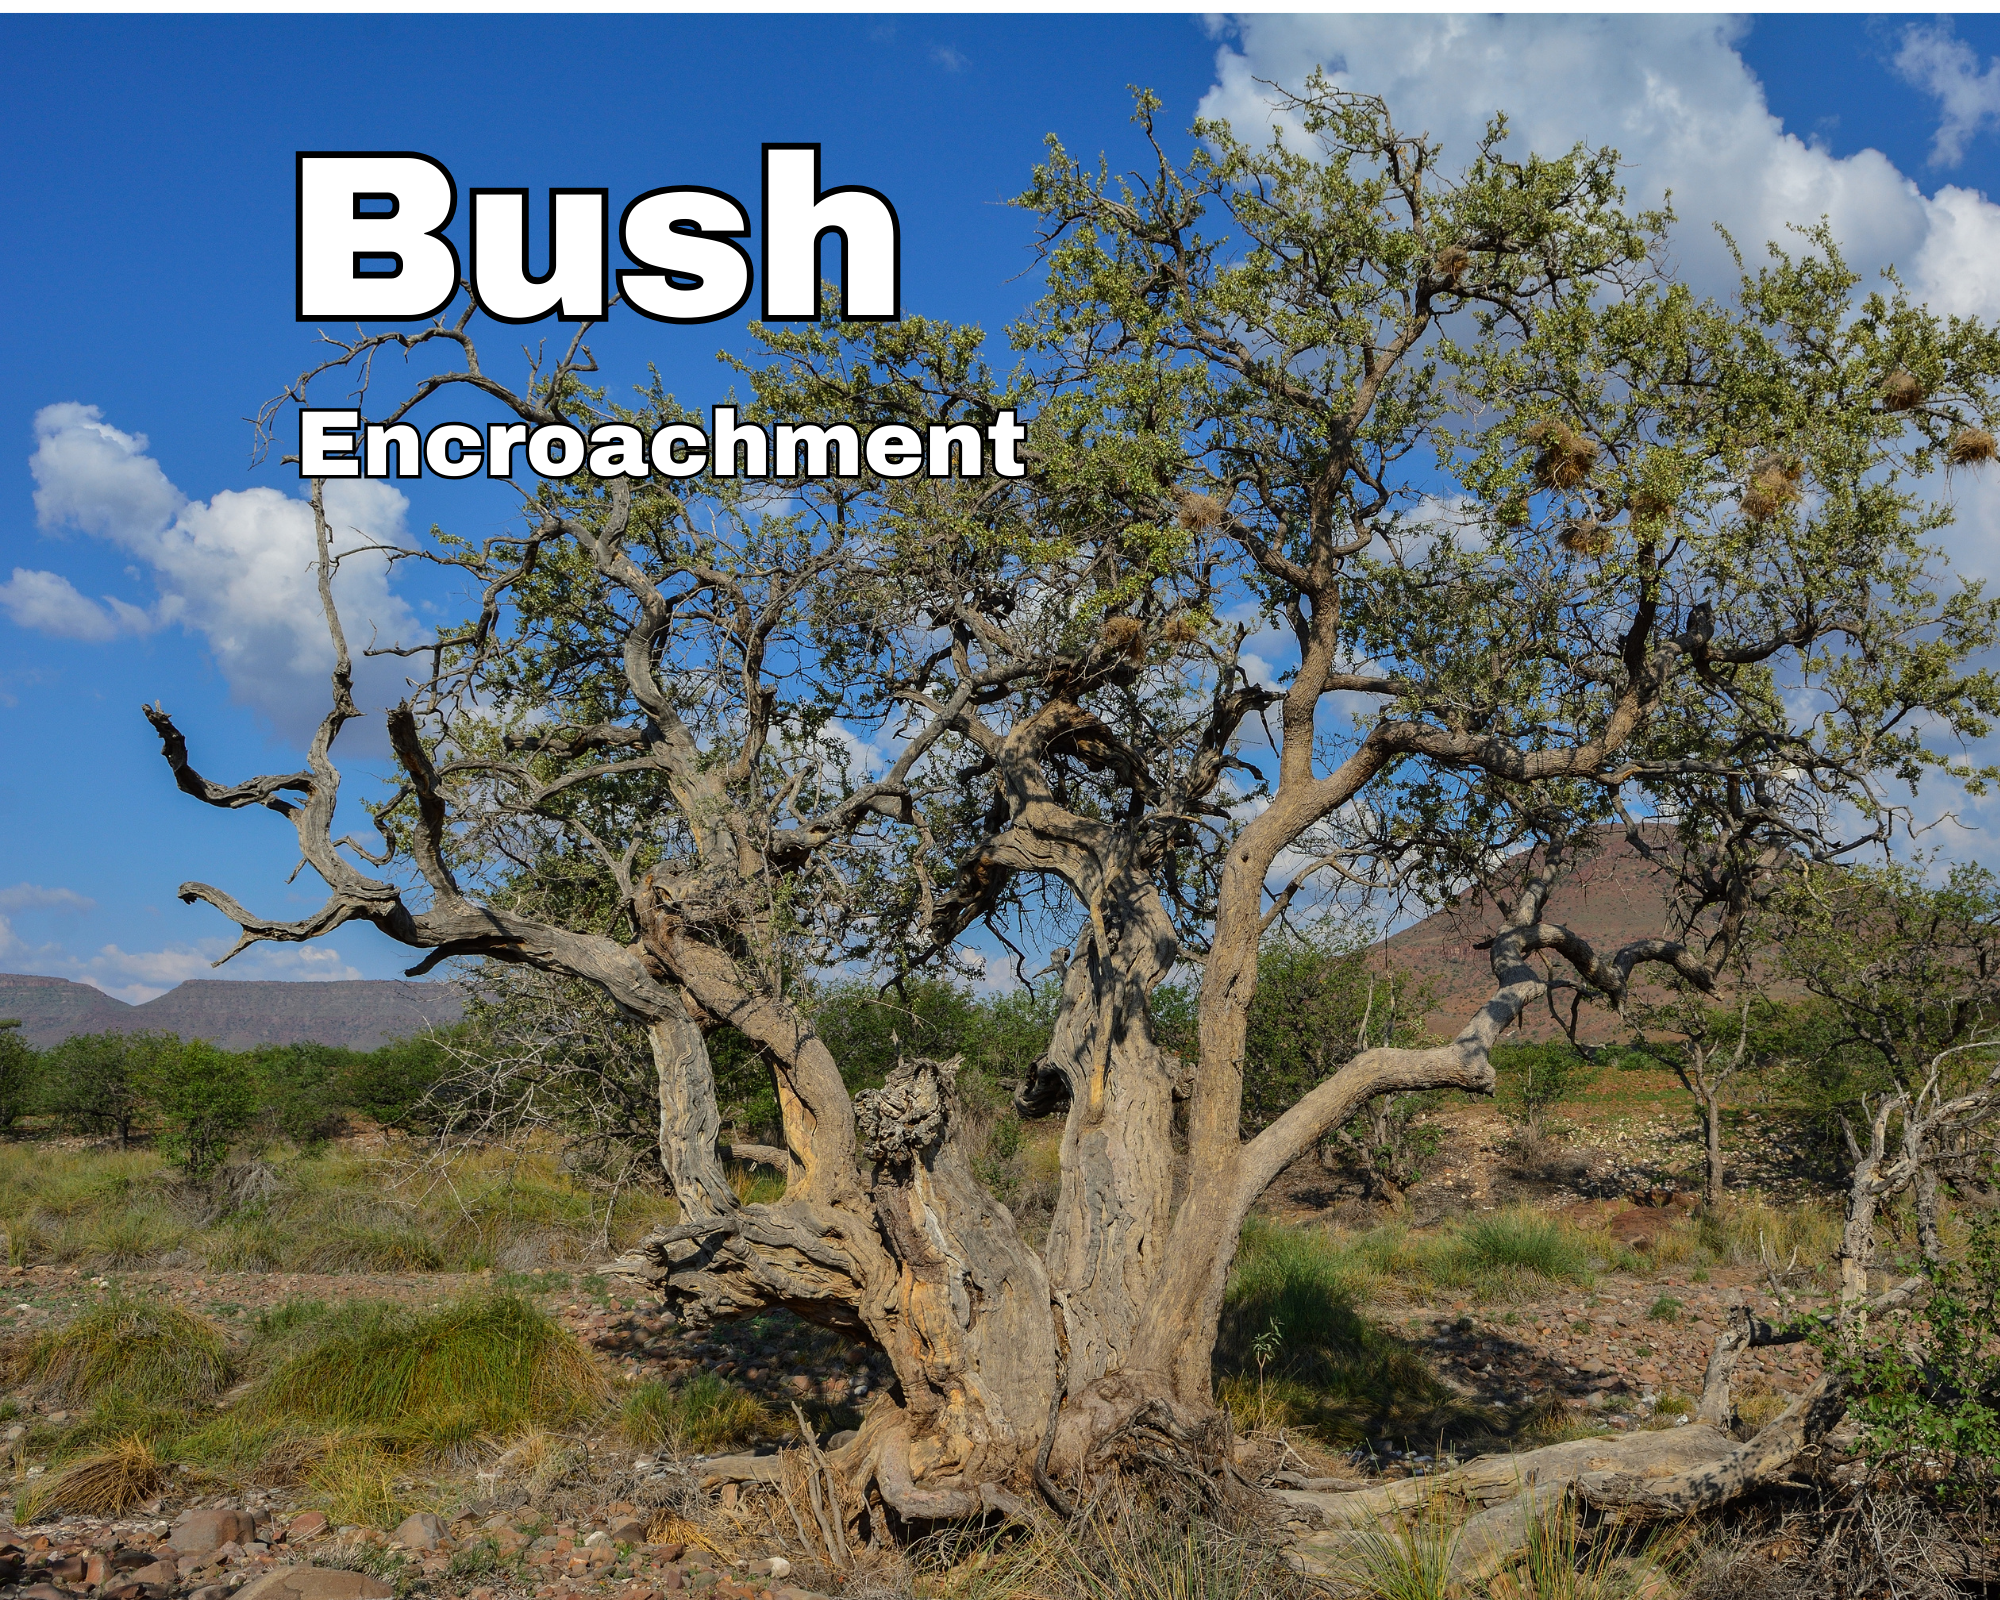 Load video: What is bush encroachment and what can be done about it